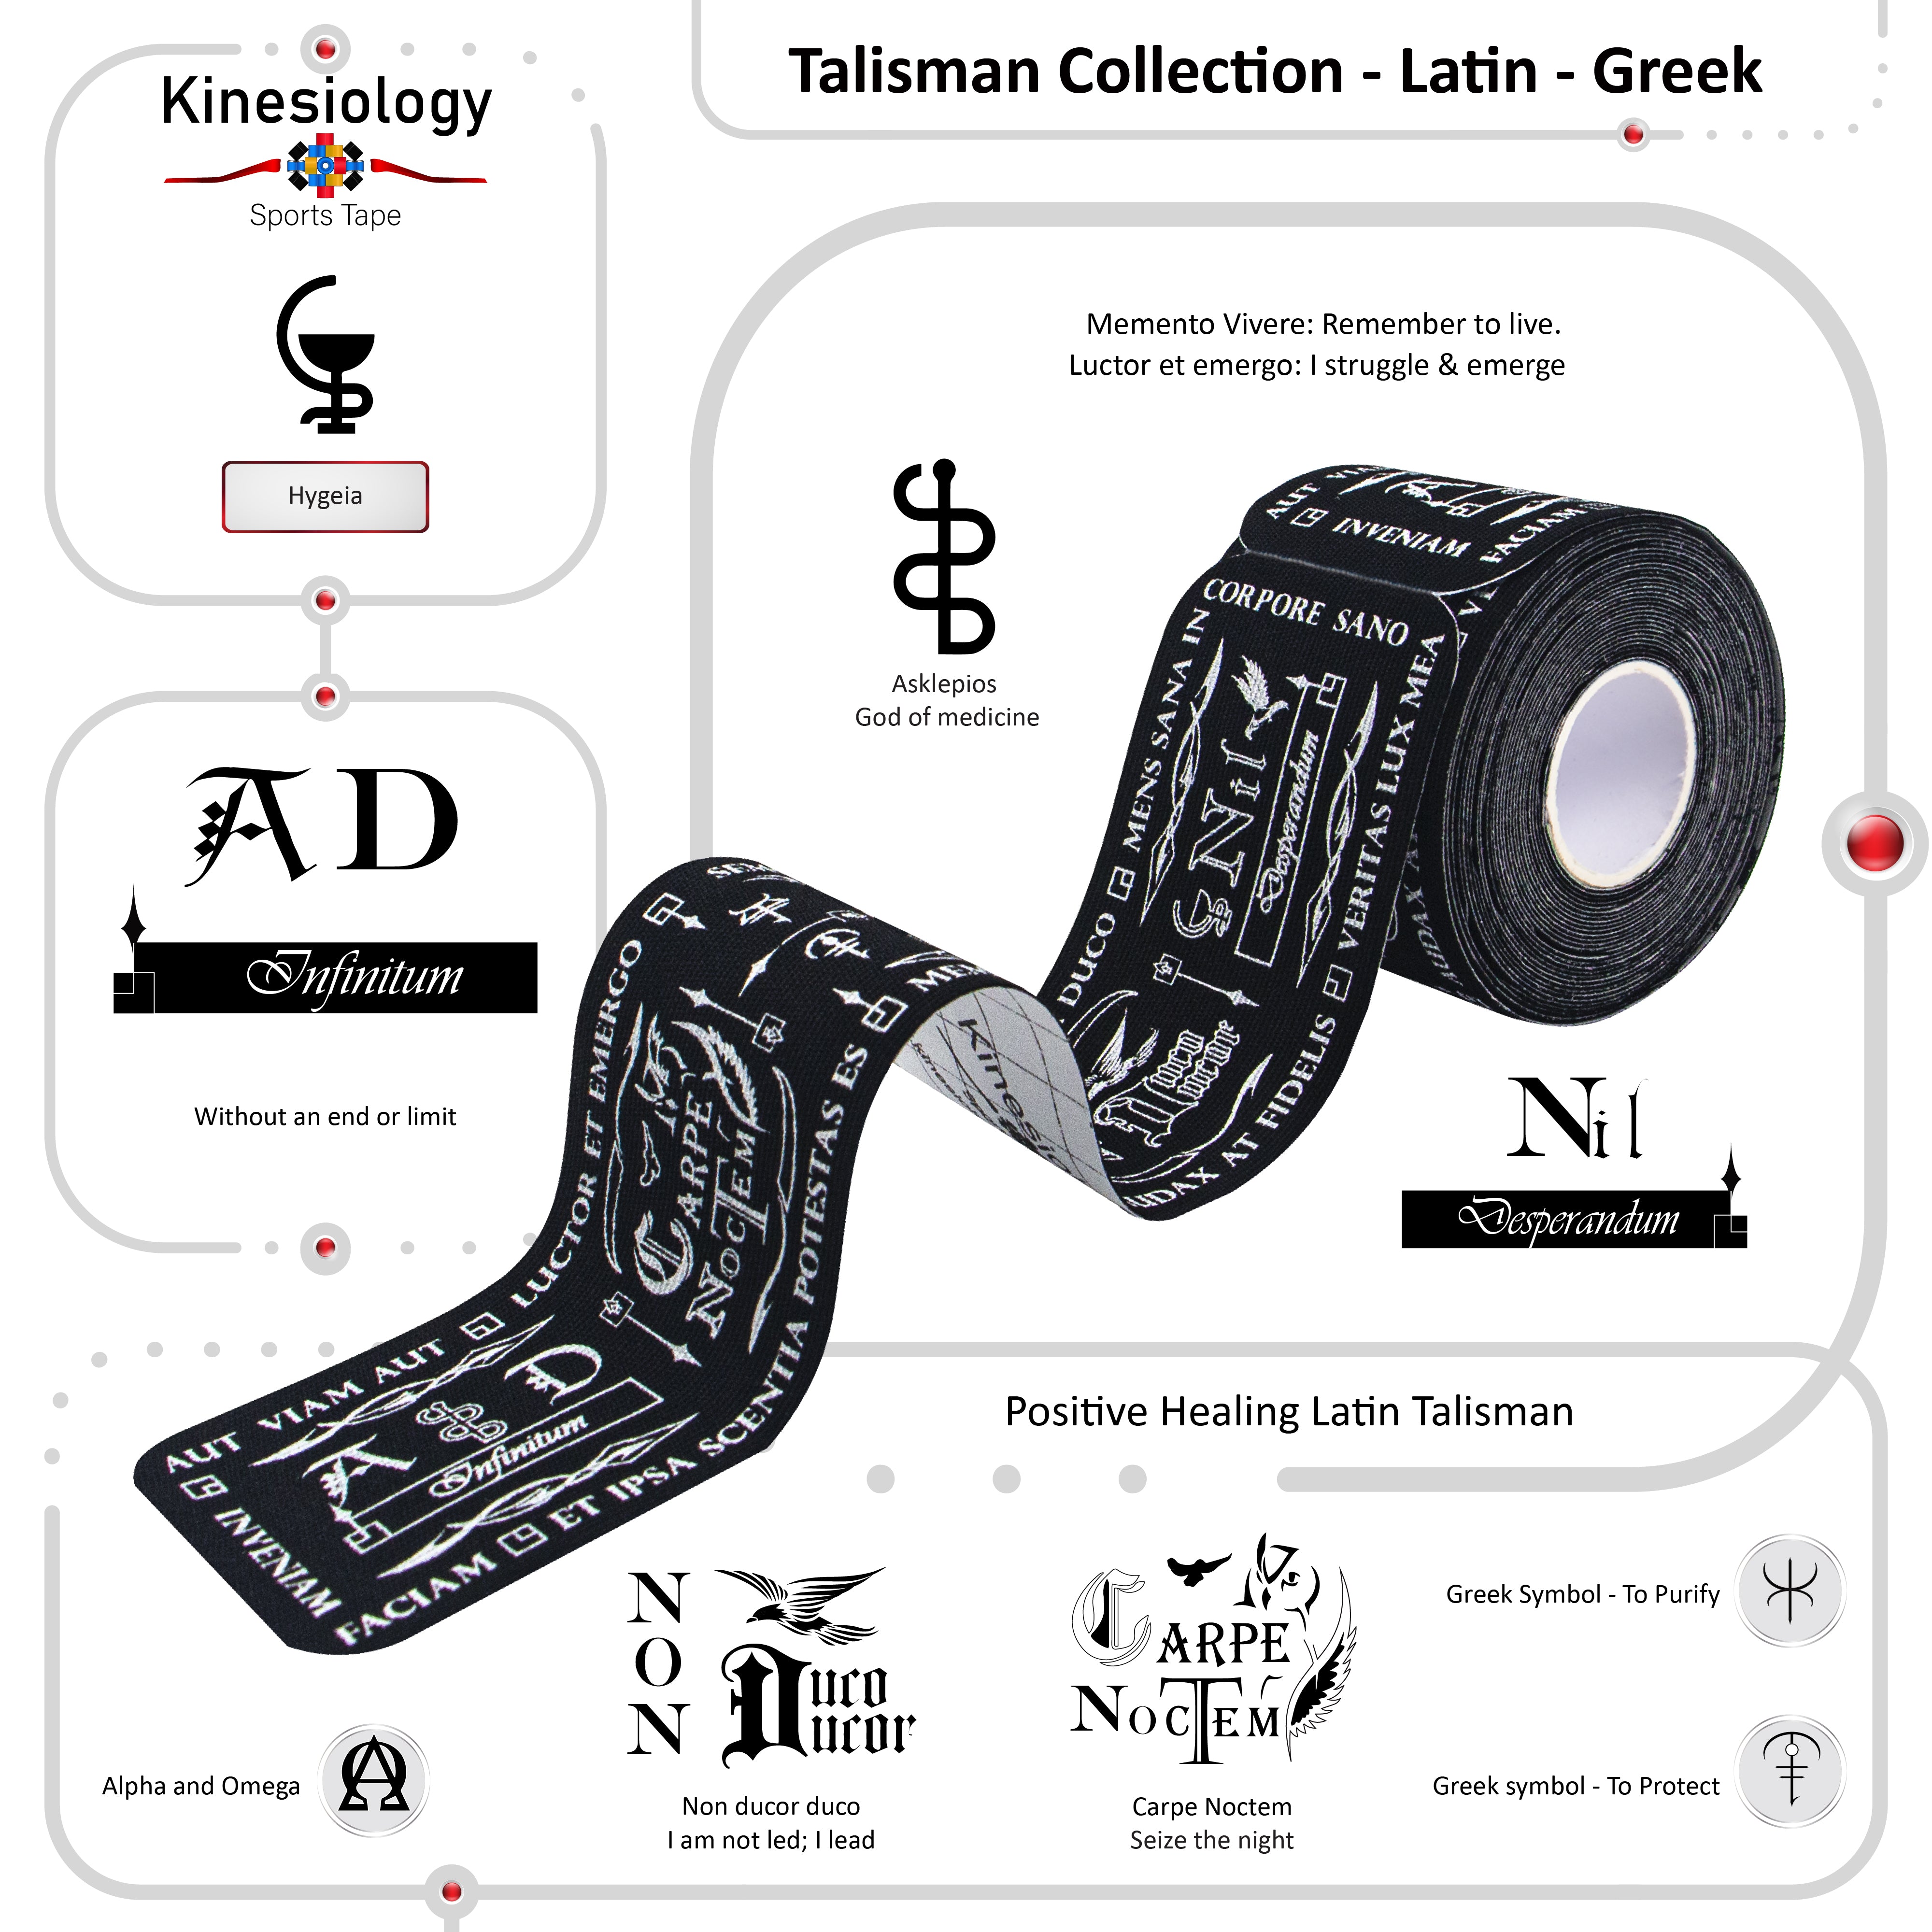 Black Kinesiology Tape Pre Cut with Dispenser - Talisman - Latin - Greek - Horizontal Design - Athletic Sports Tape - For Healing and Recovery